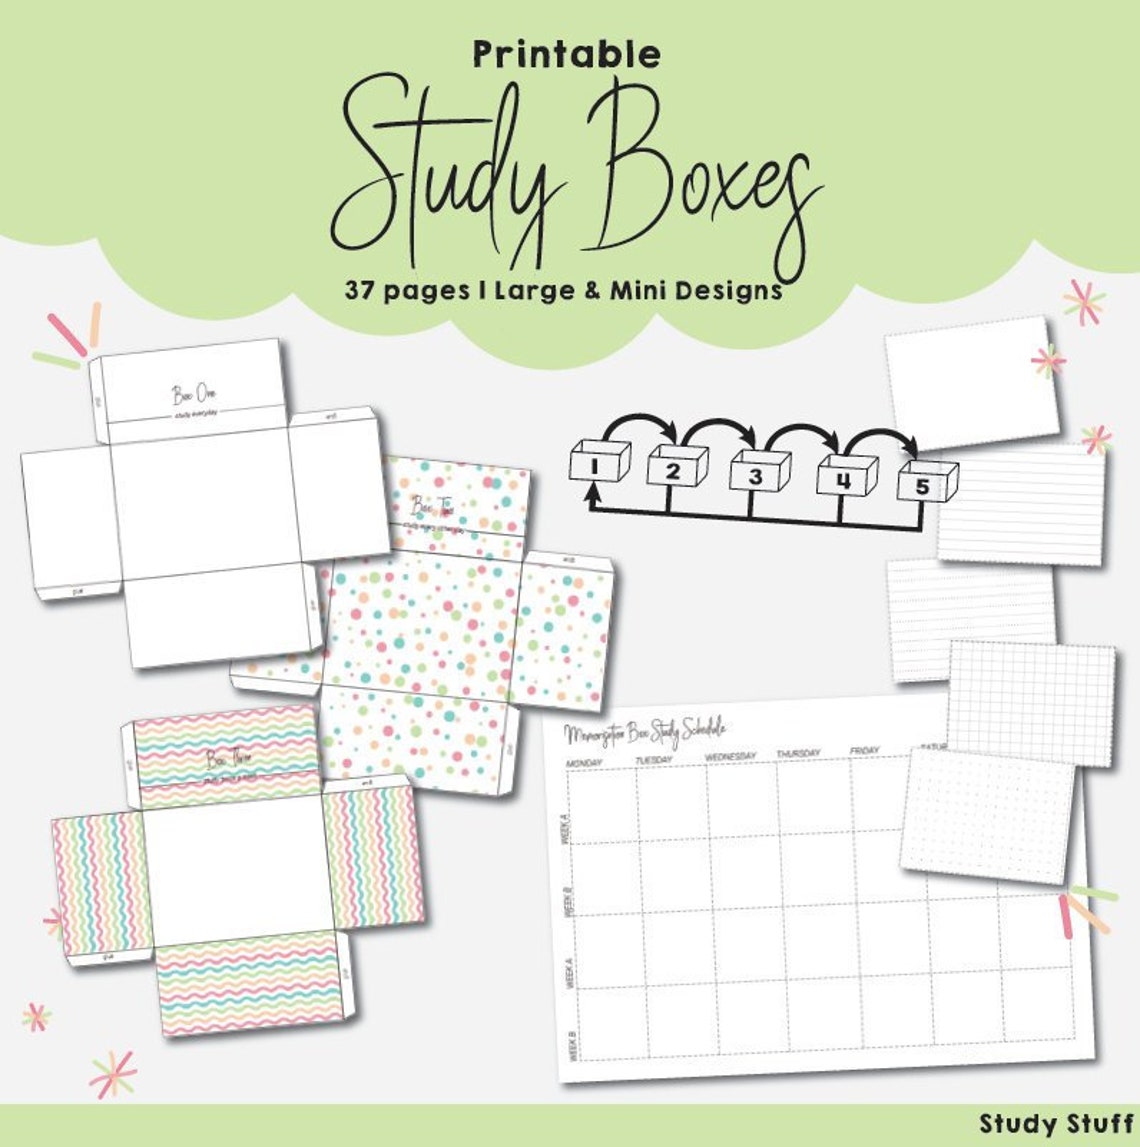 Study Boxes  Spaced Repetition Learning with Printable Index image 0